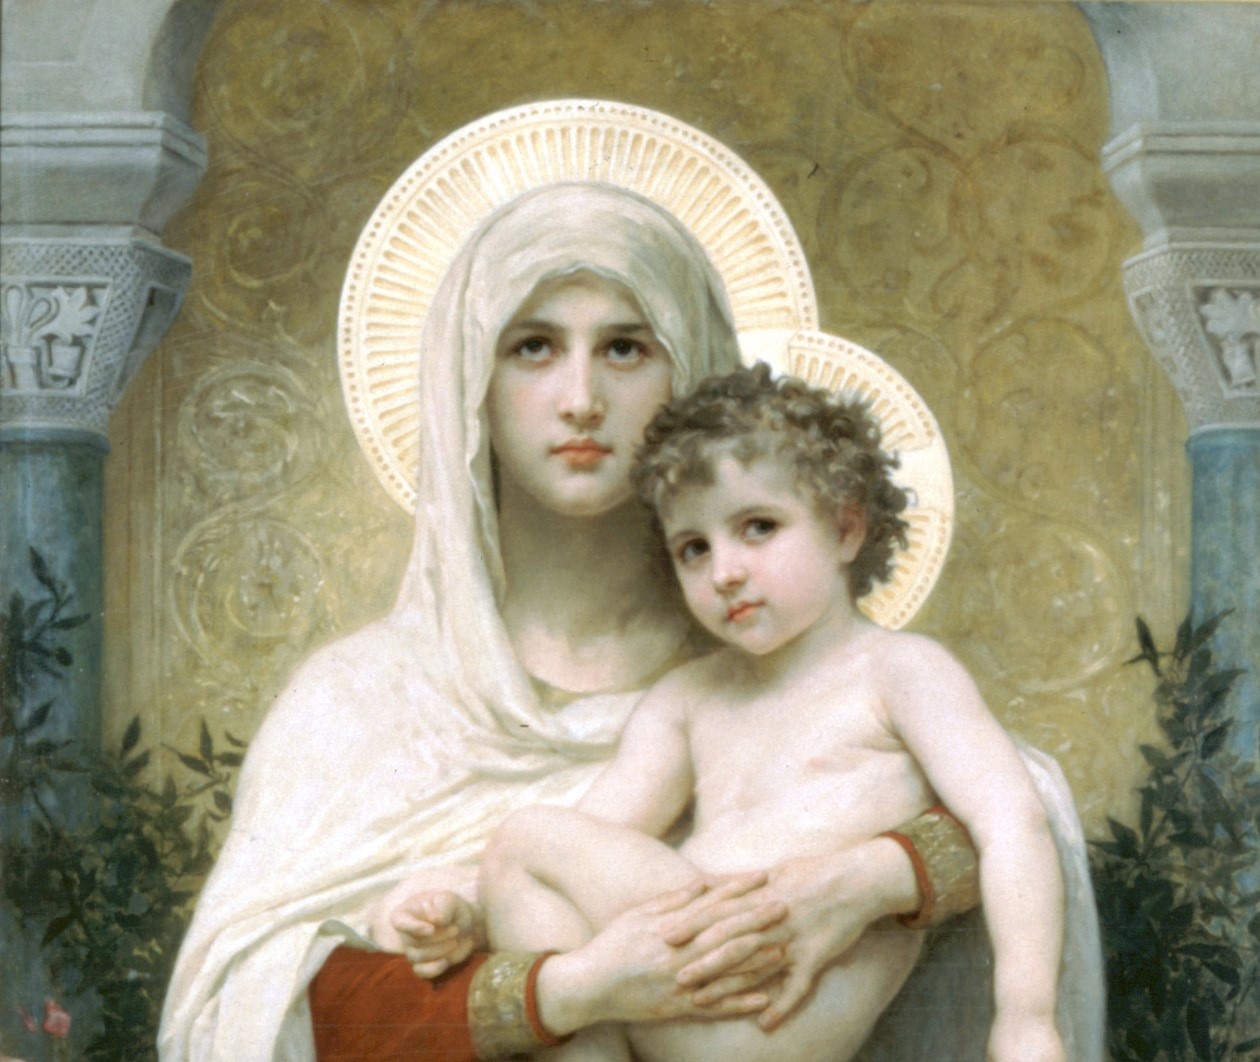 The Feast of the Most Holy Name of Mary